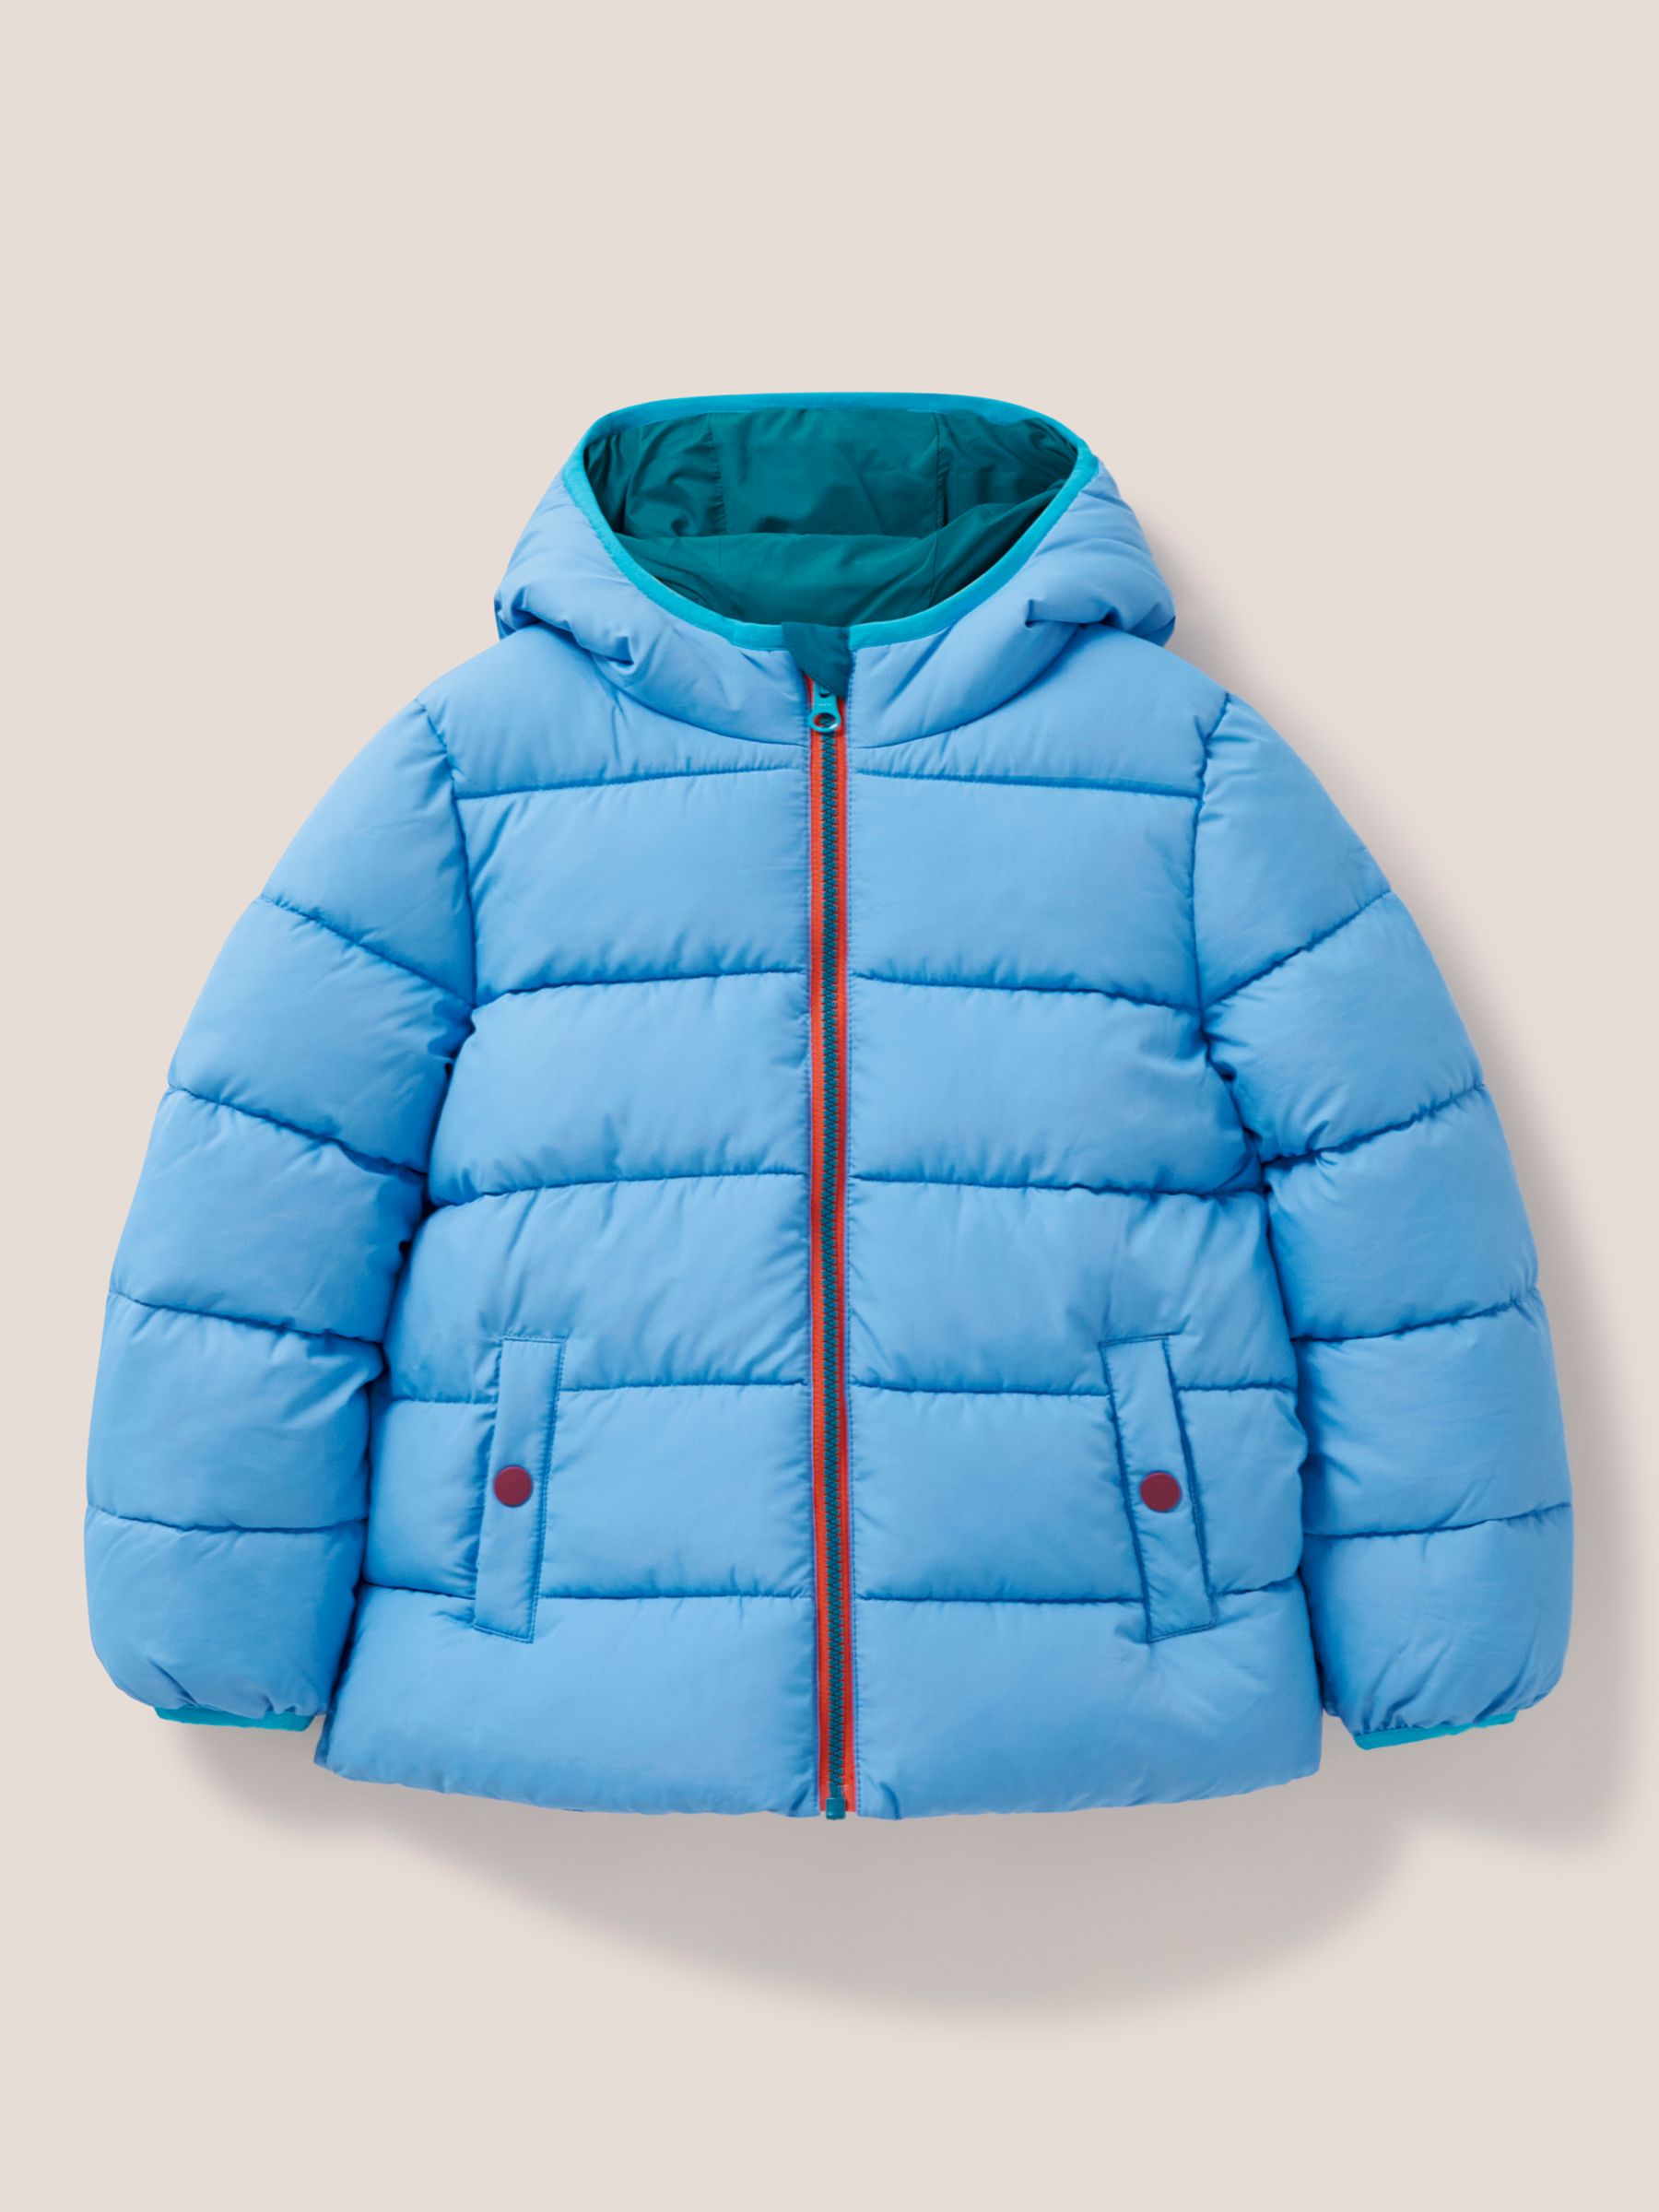 White Stuff Kids' Quilted Puffer Hooded Jacket, Bright Teal, 7-8 years